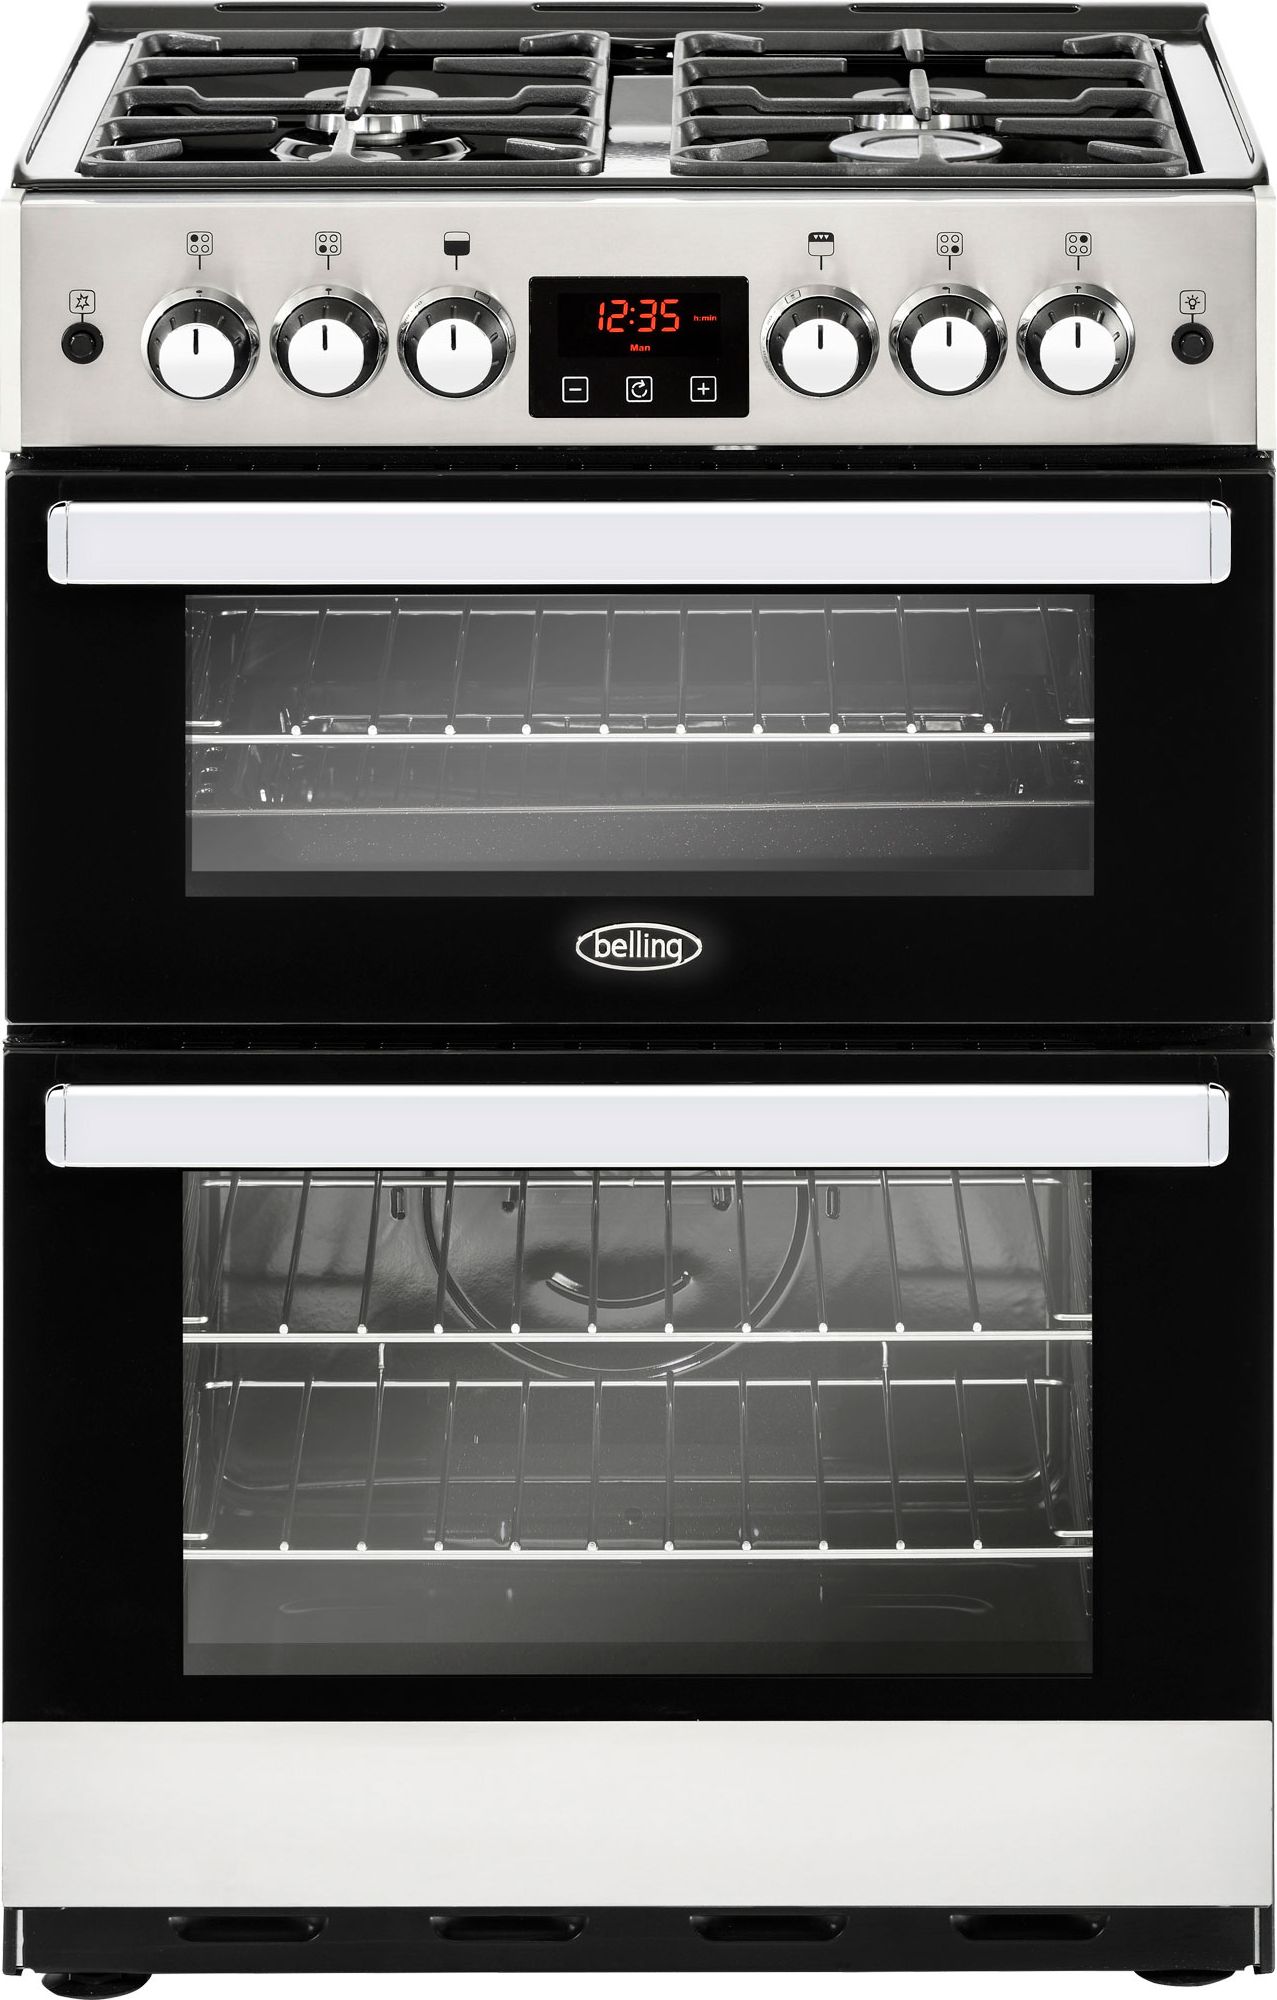 Belling Cookcentre 60G 60cm Freestanding Gas Cooker with Full Width Electric Grill - Stainless Steel - A+/A Rated, Stainless Steel